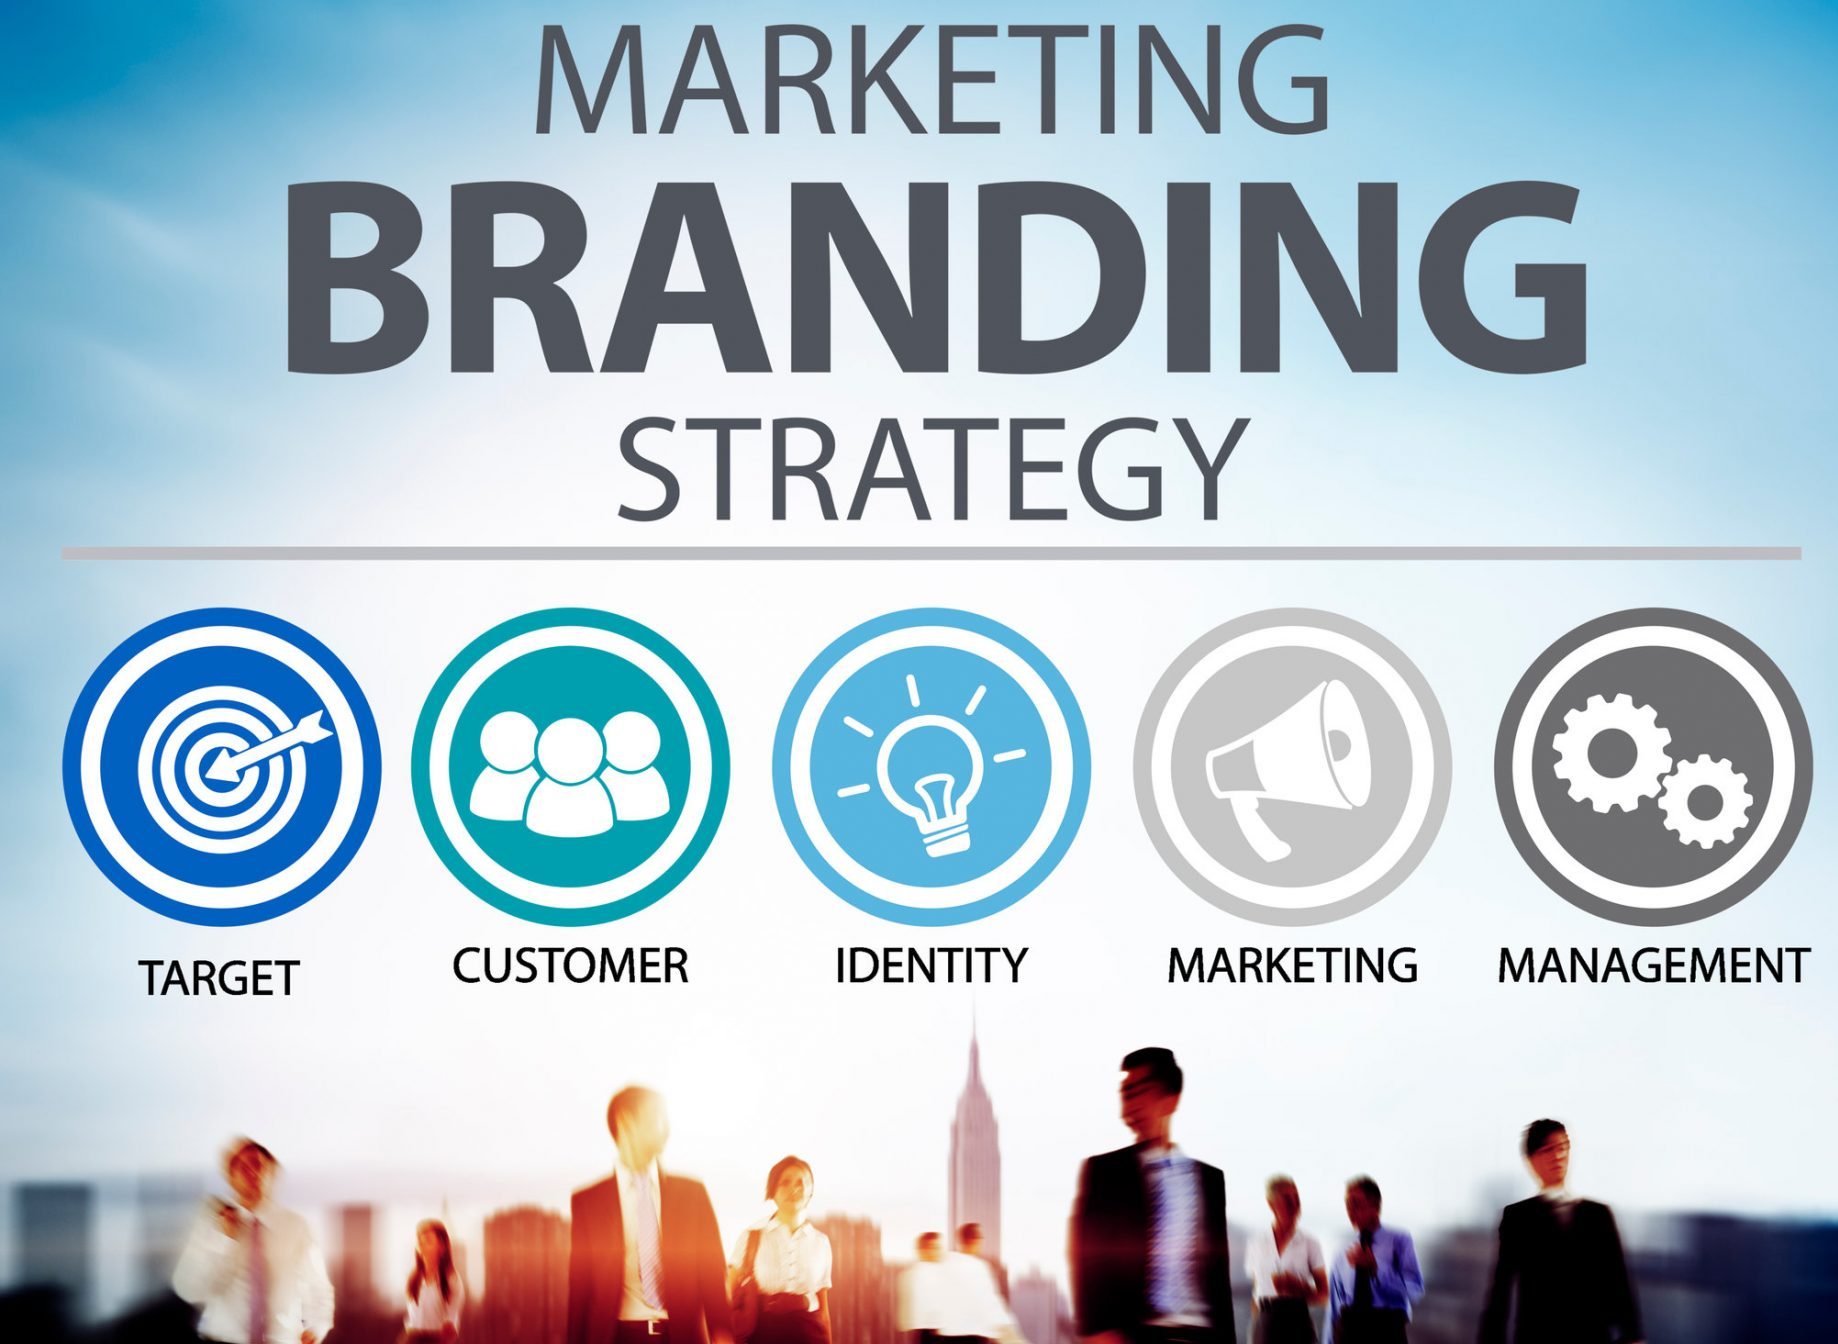 An image with the text "marketing branding strategy" because I help wellness businesses with marketing strategy and branding.